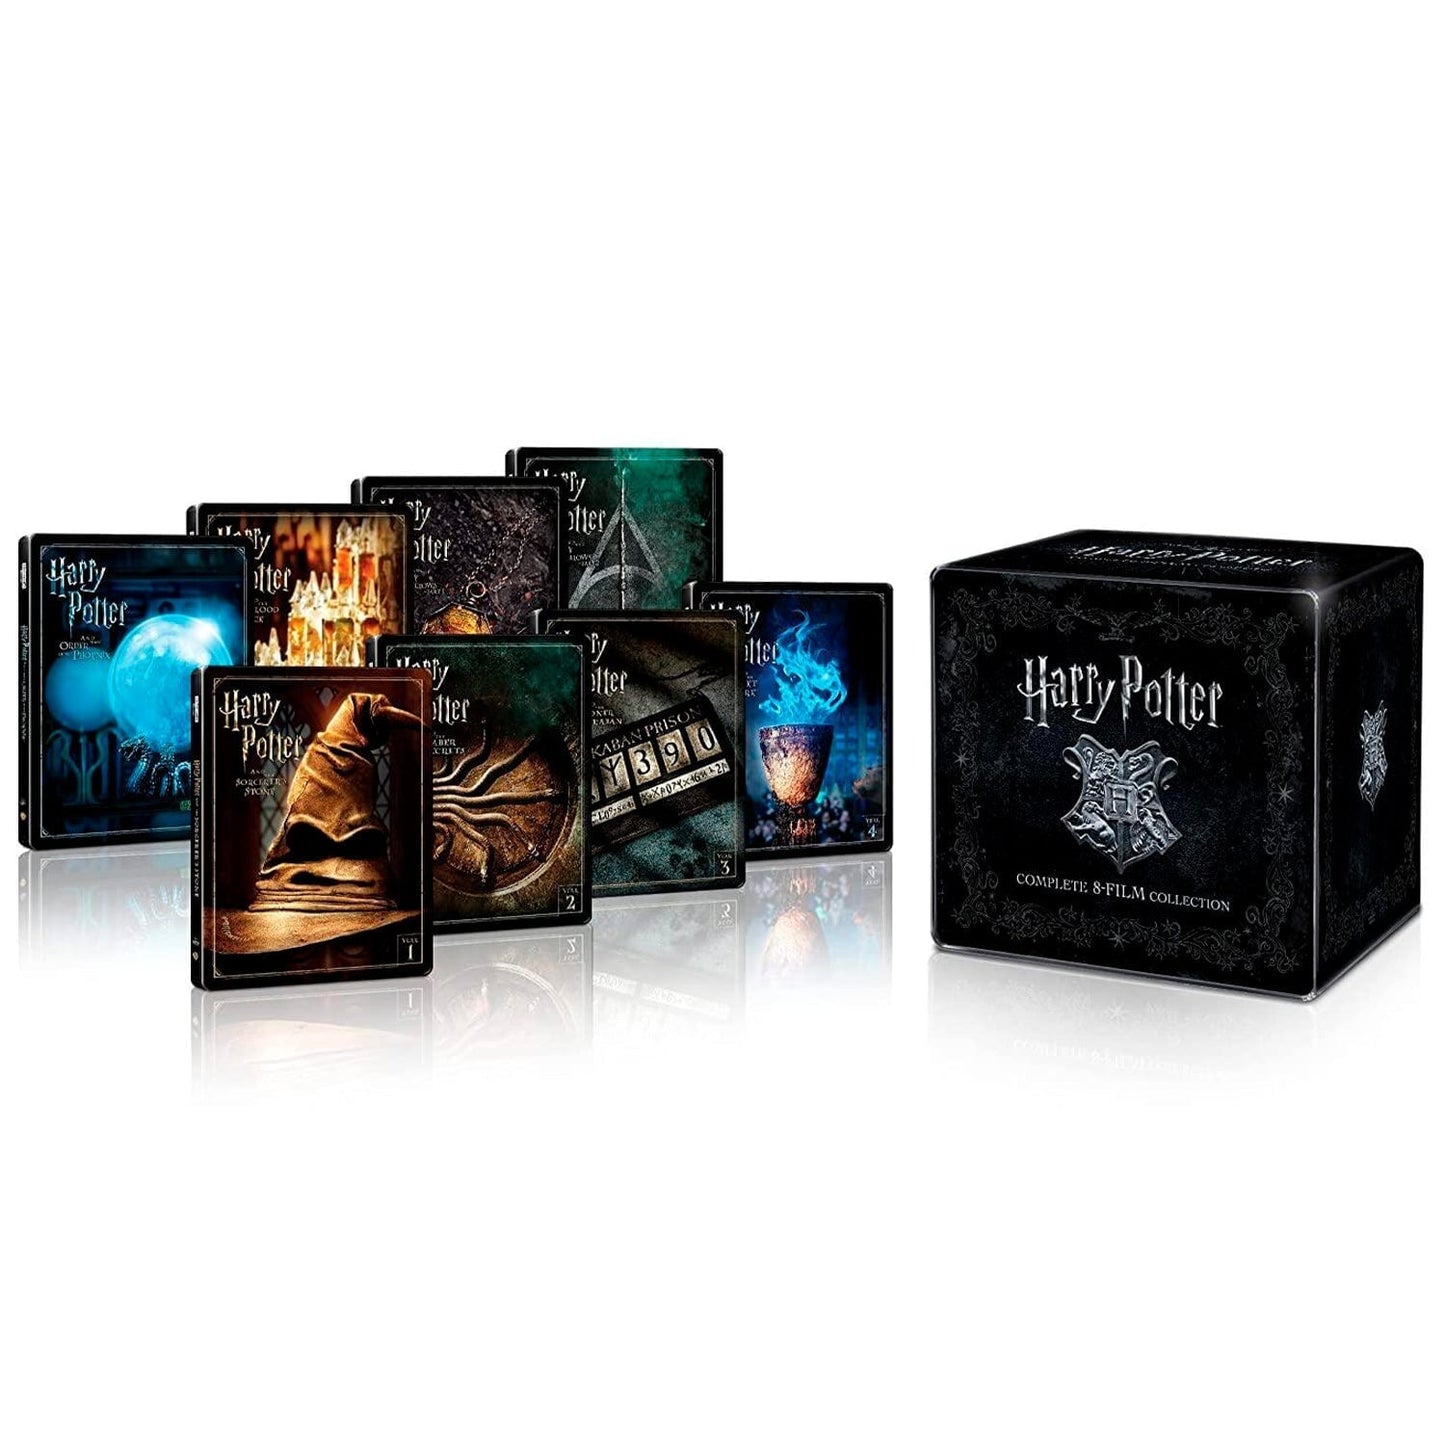 Harry Potter And The Deathly Hallows Part 1: Ltd. (BD)(SteelBook)  [UK][NEW][OOP]